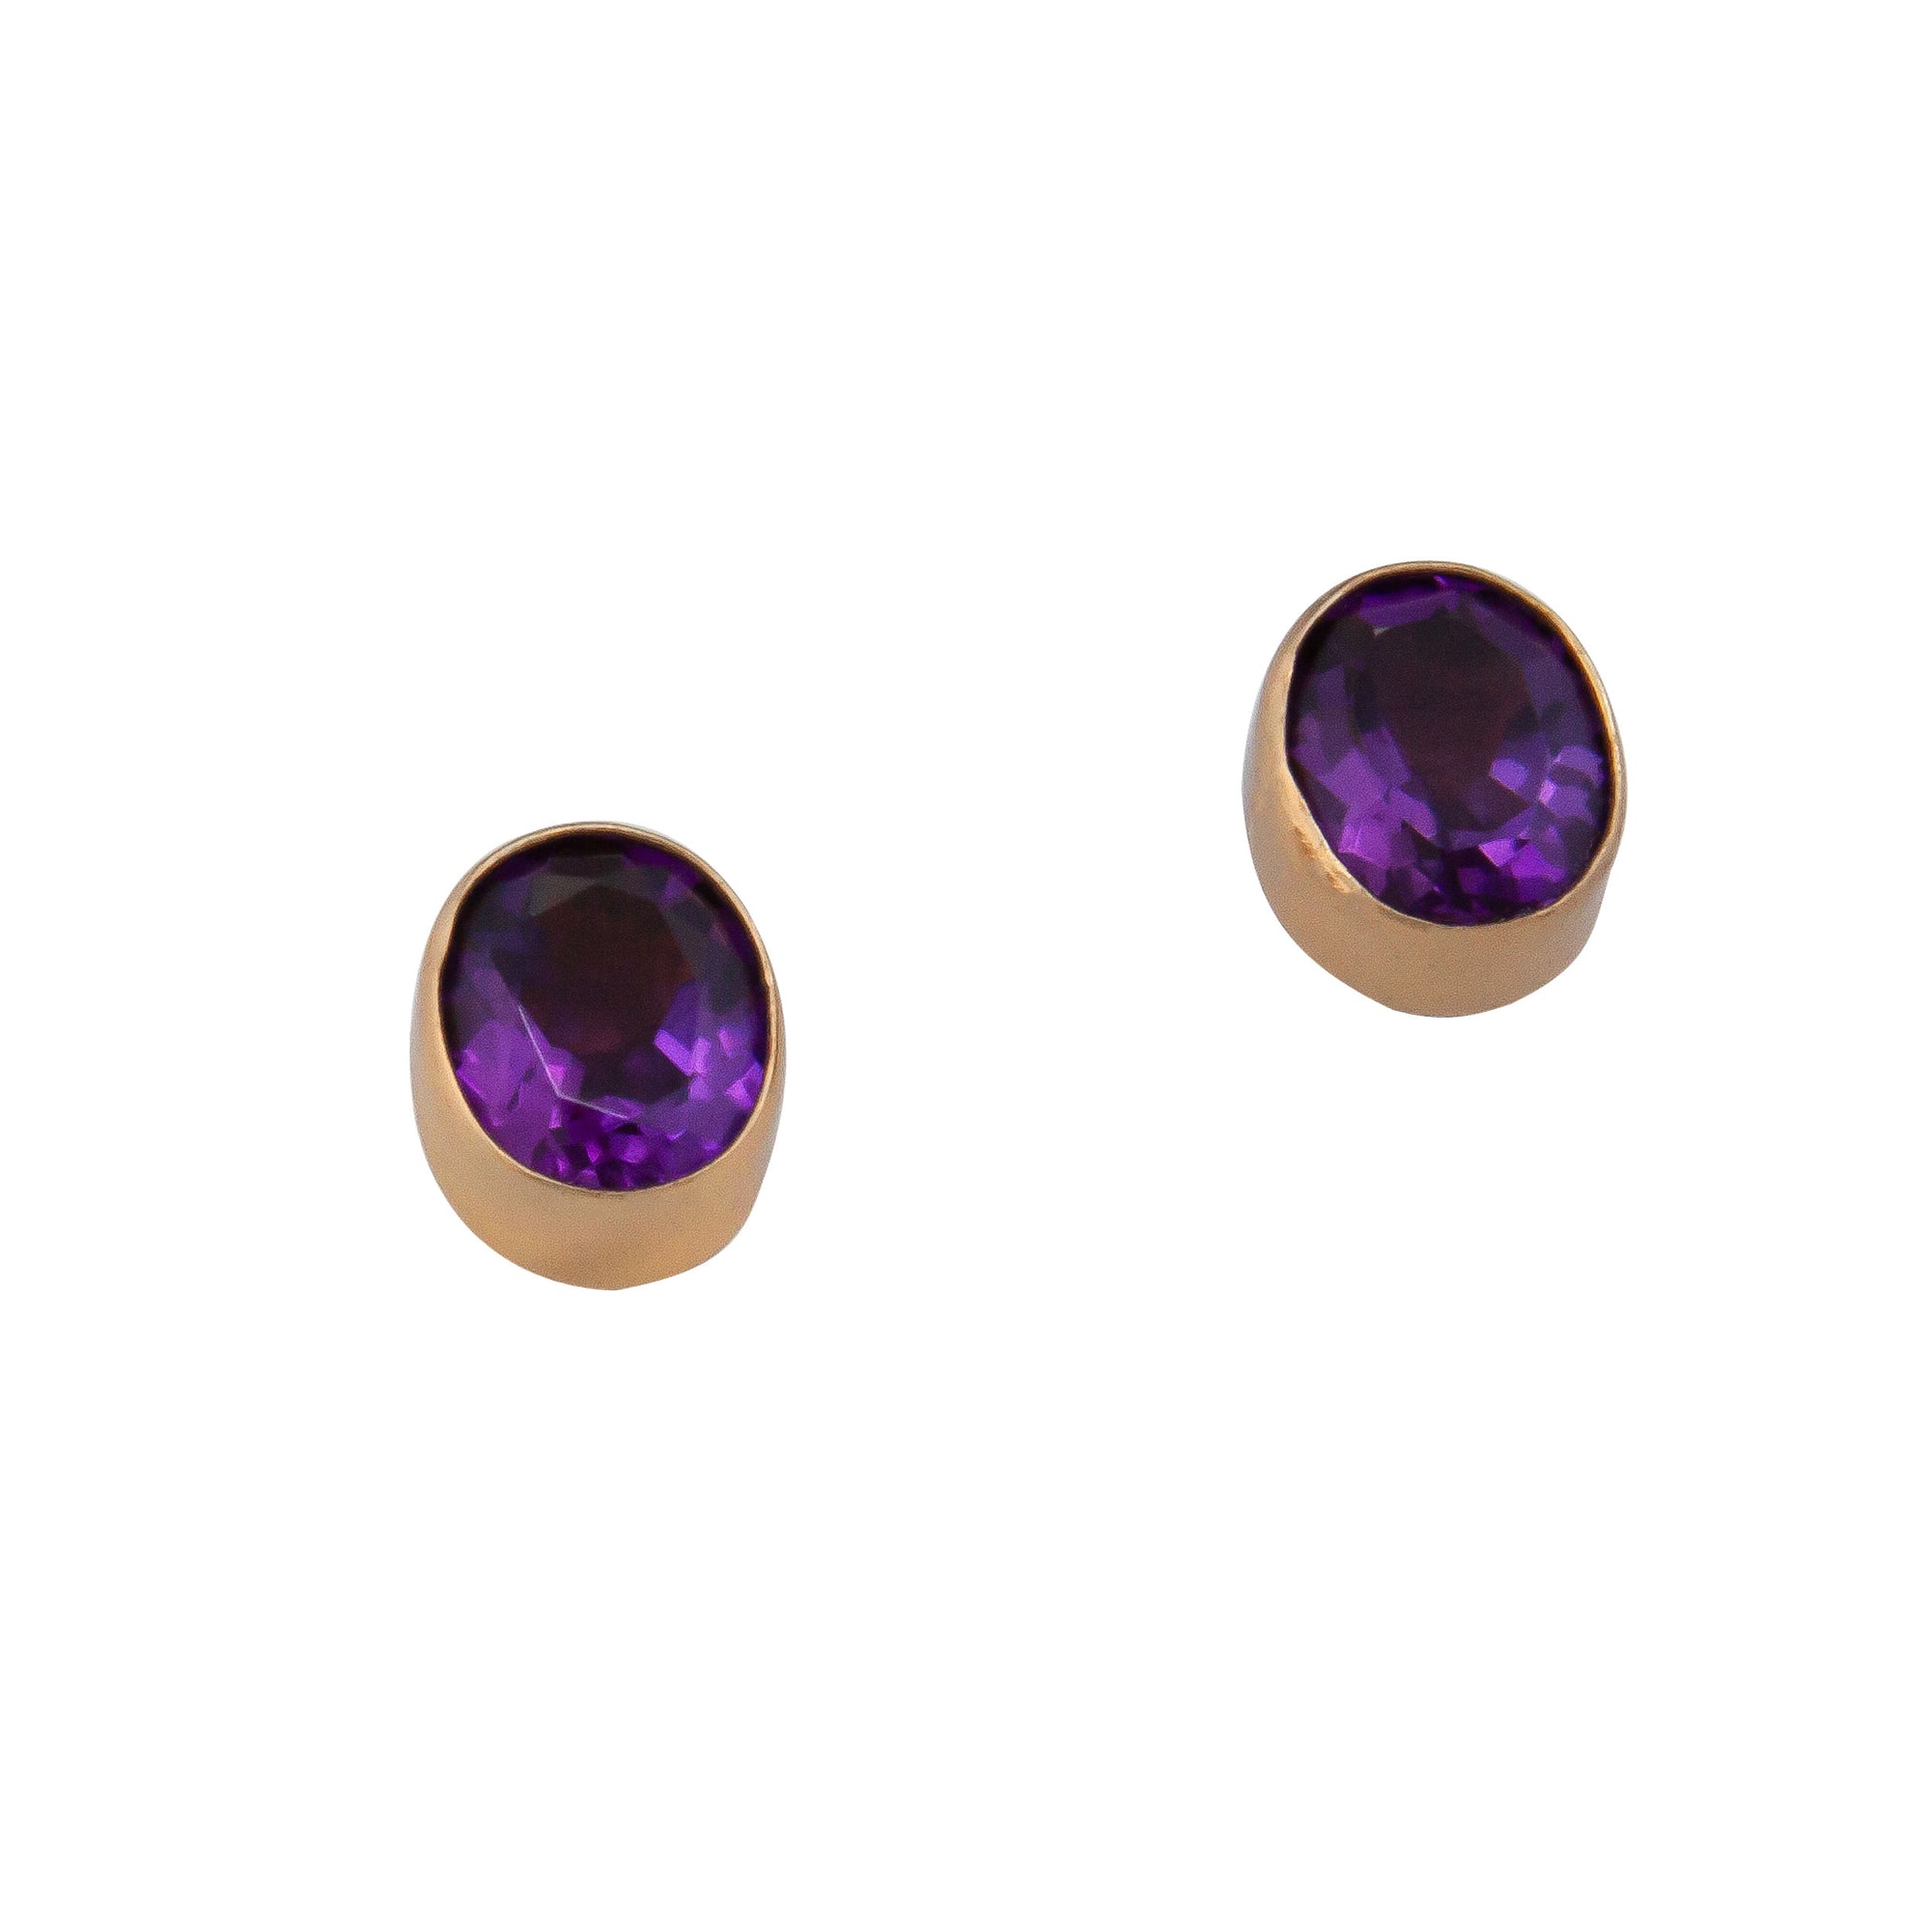 Charles Albert Jewelry - Alchemia Amethyst Post Earrings - Front View